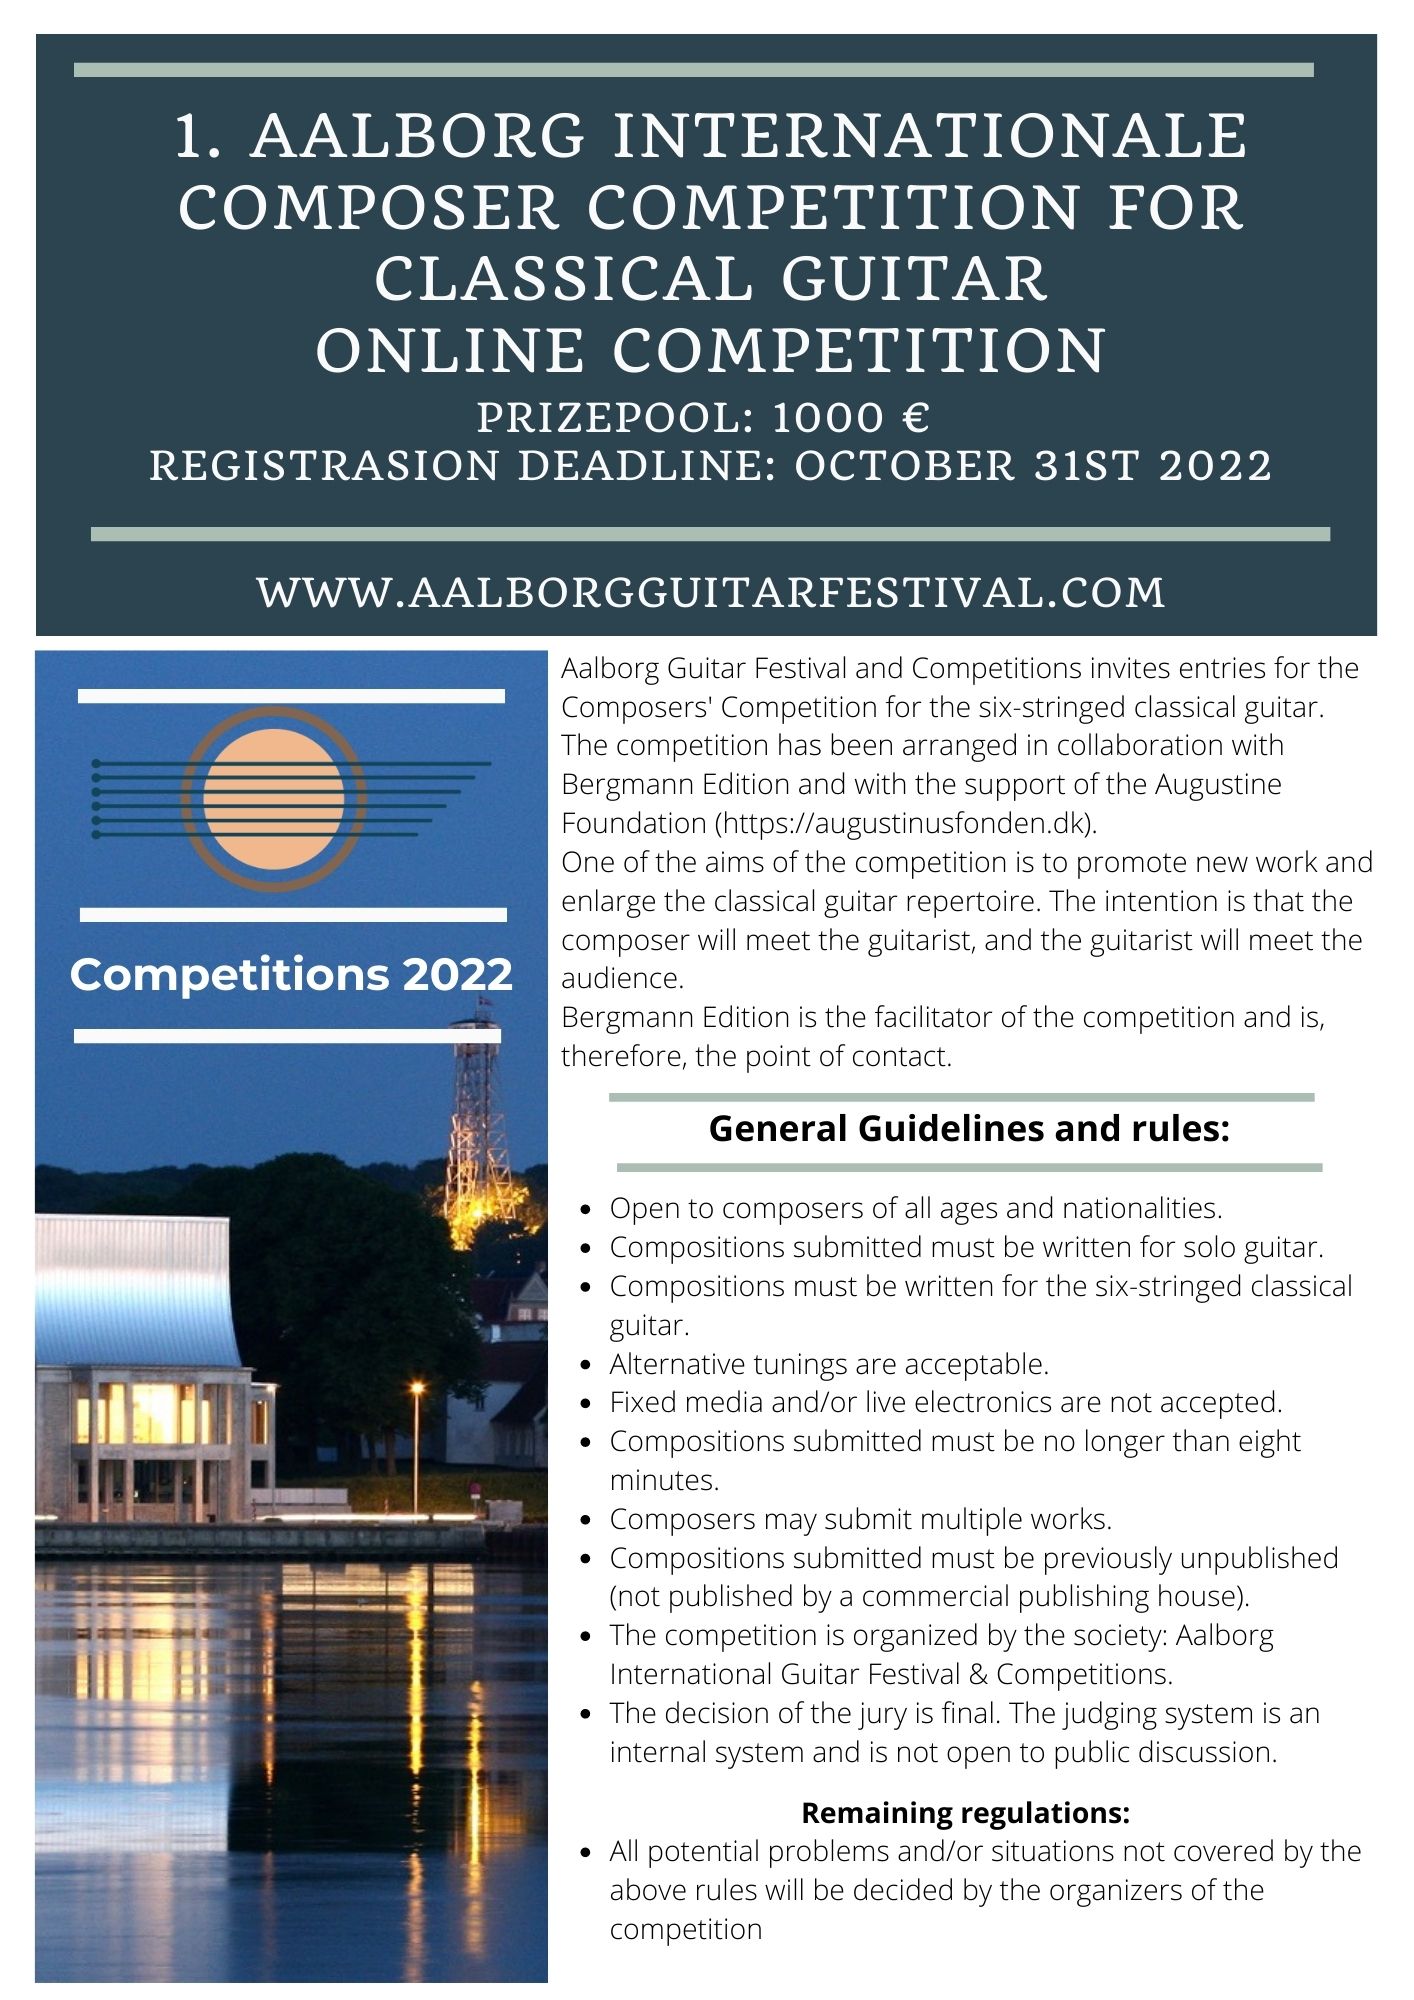 Composer Competition - image 1-9 on https://aalborgguitarfestival.com